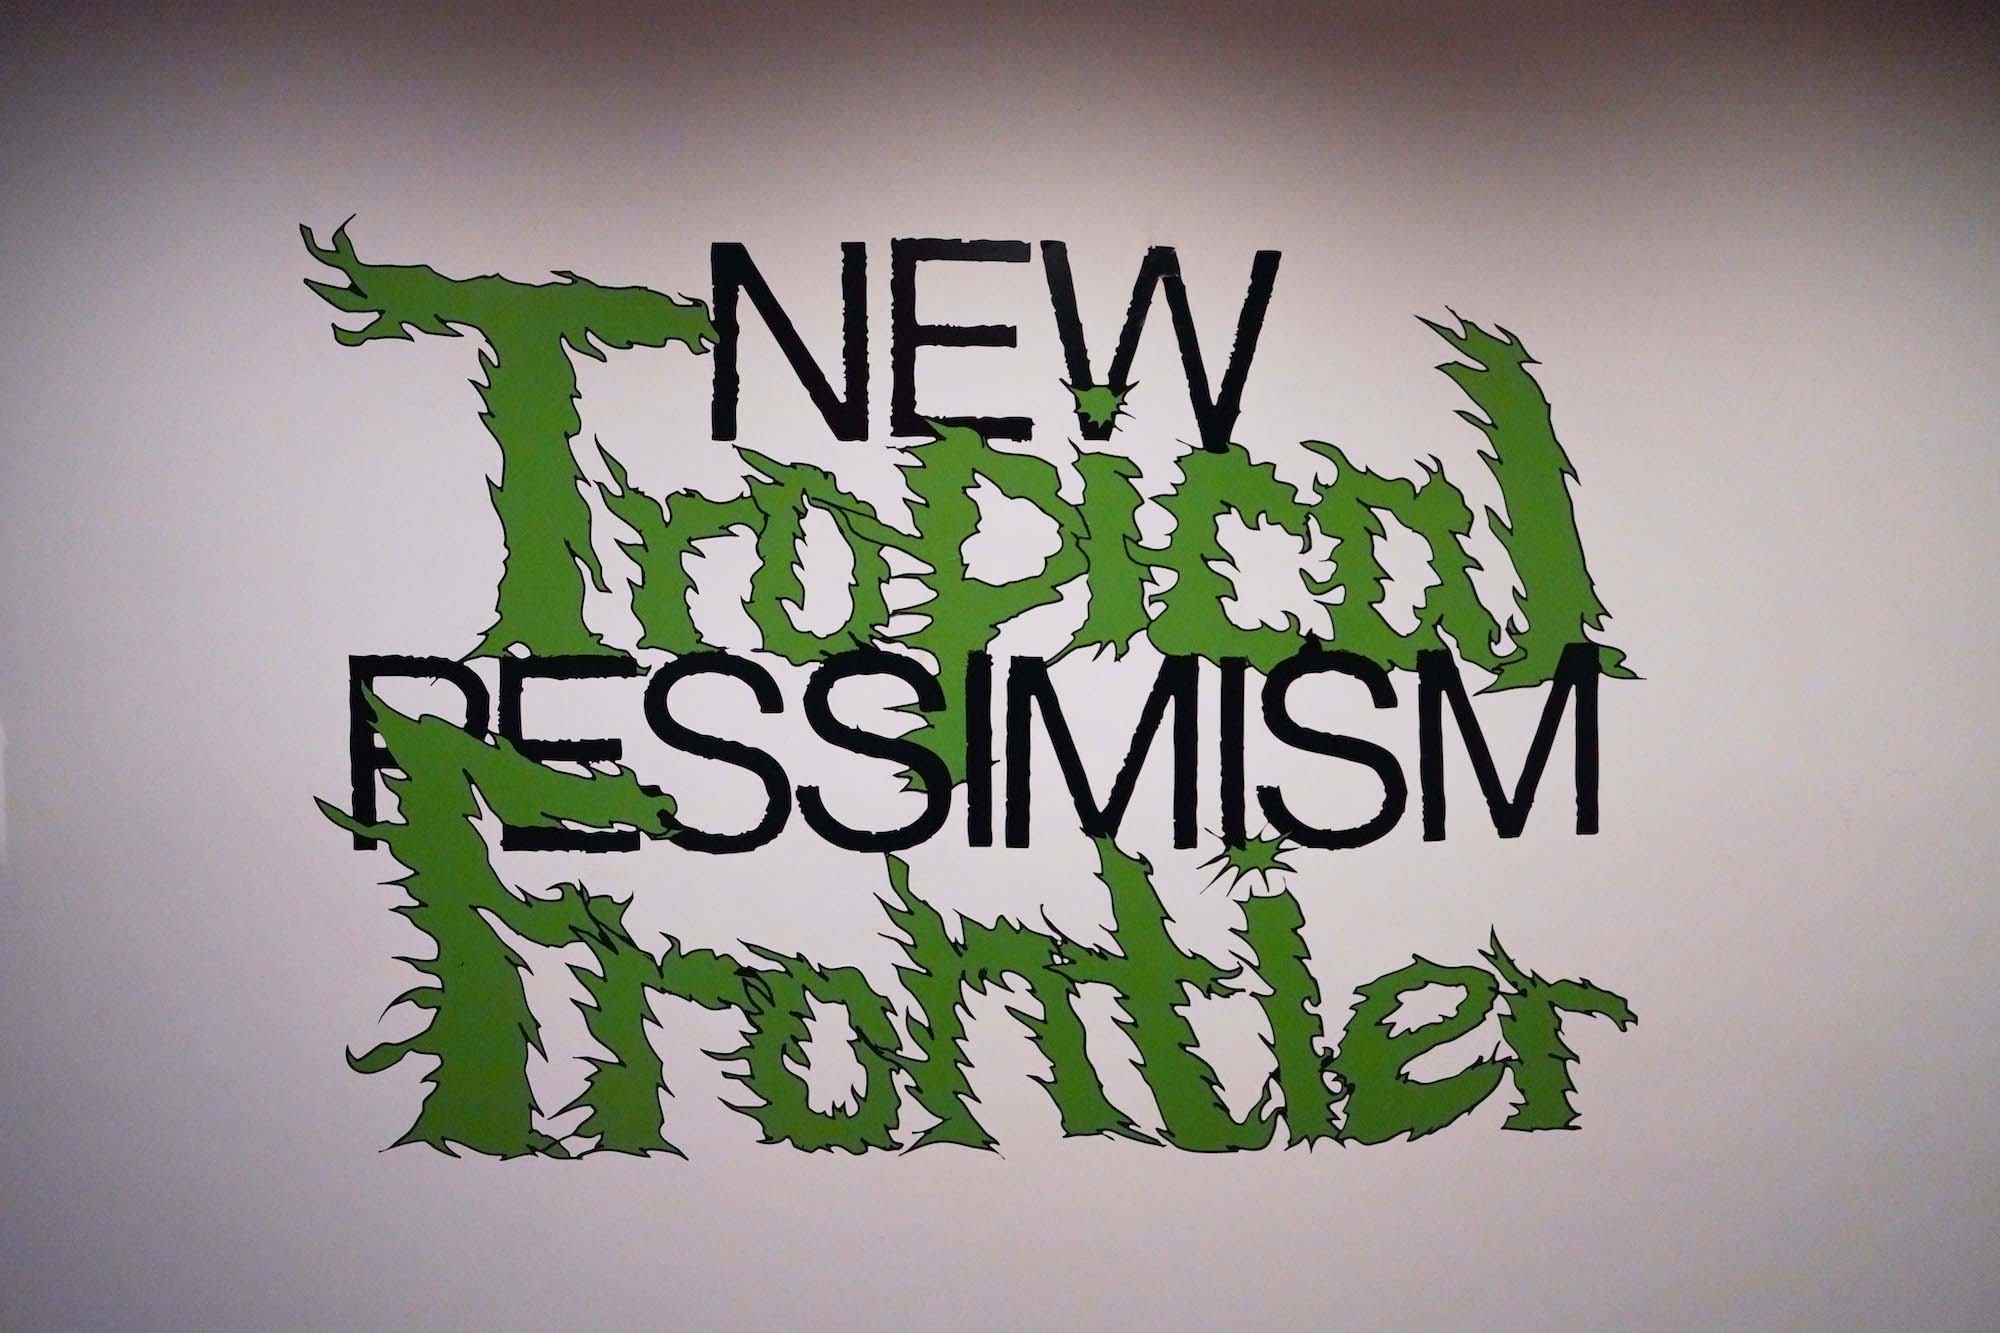 A title card reading New Pessimism Ropical Frontier in crazy green lettering.